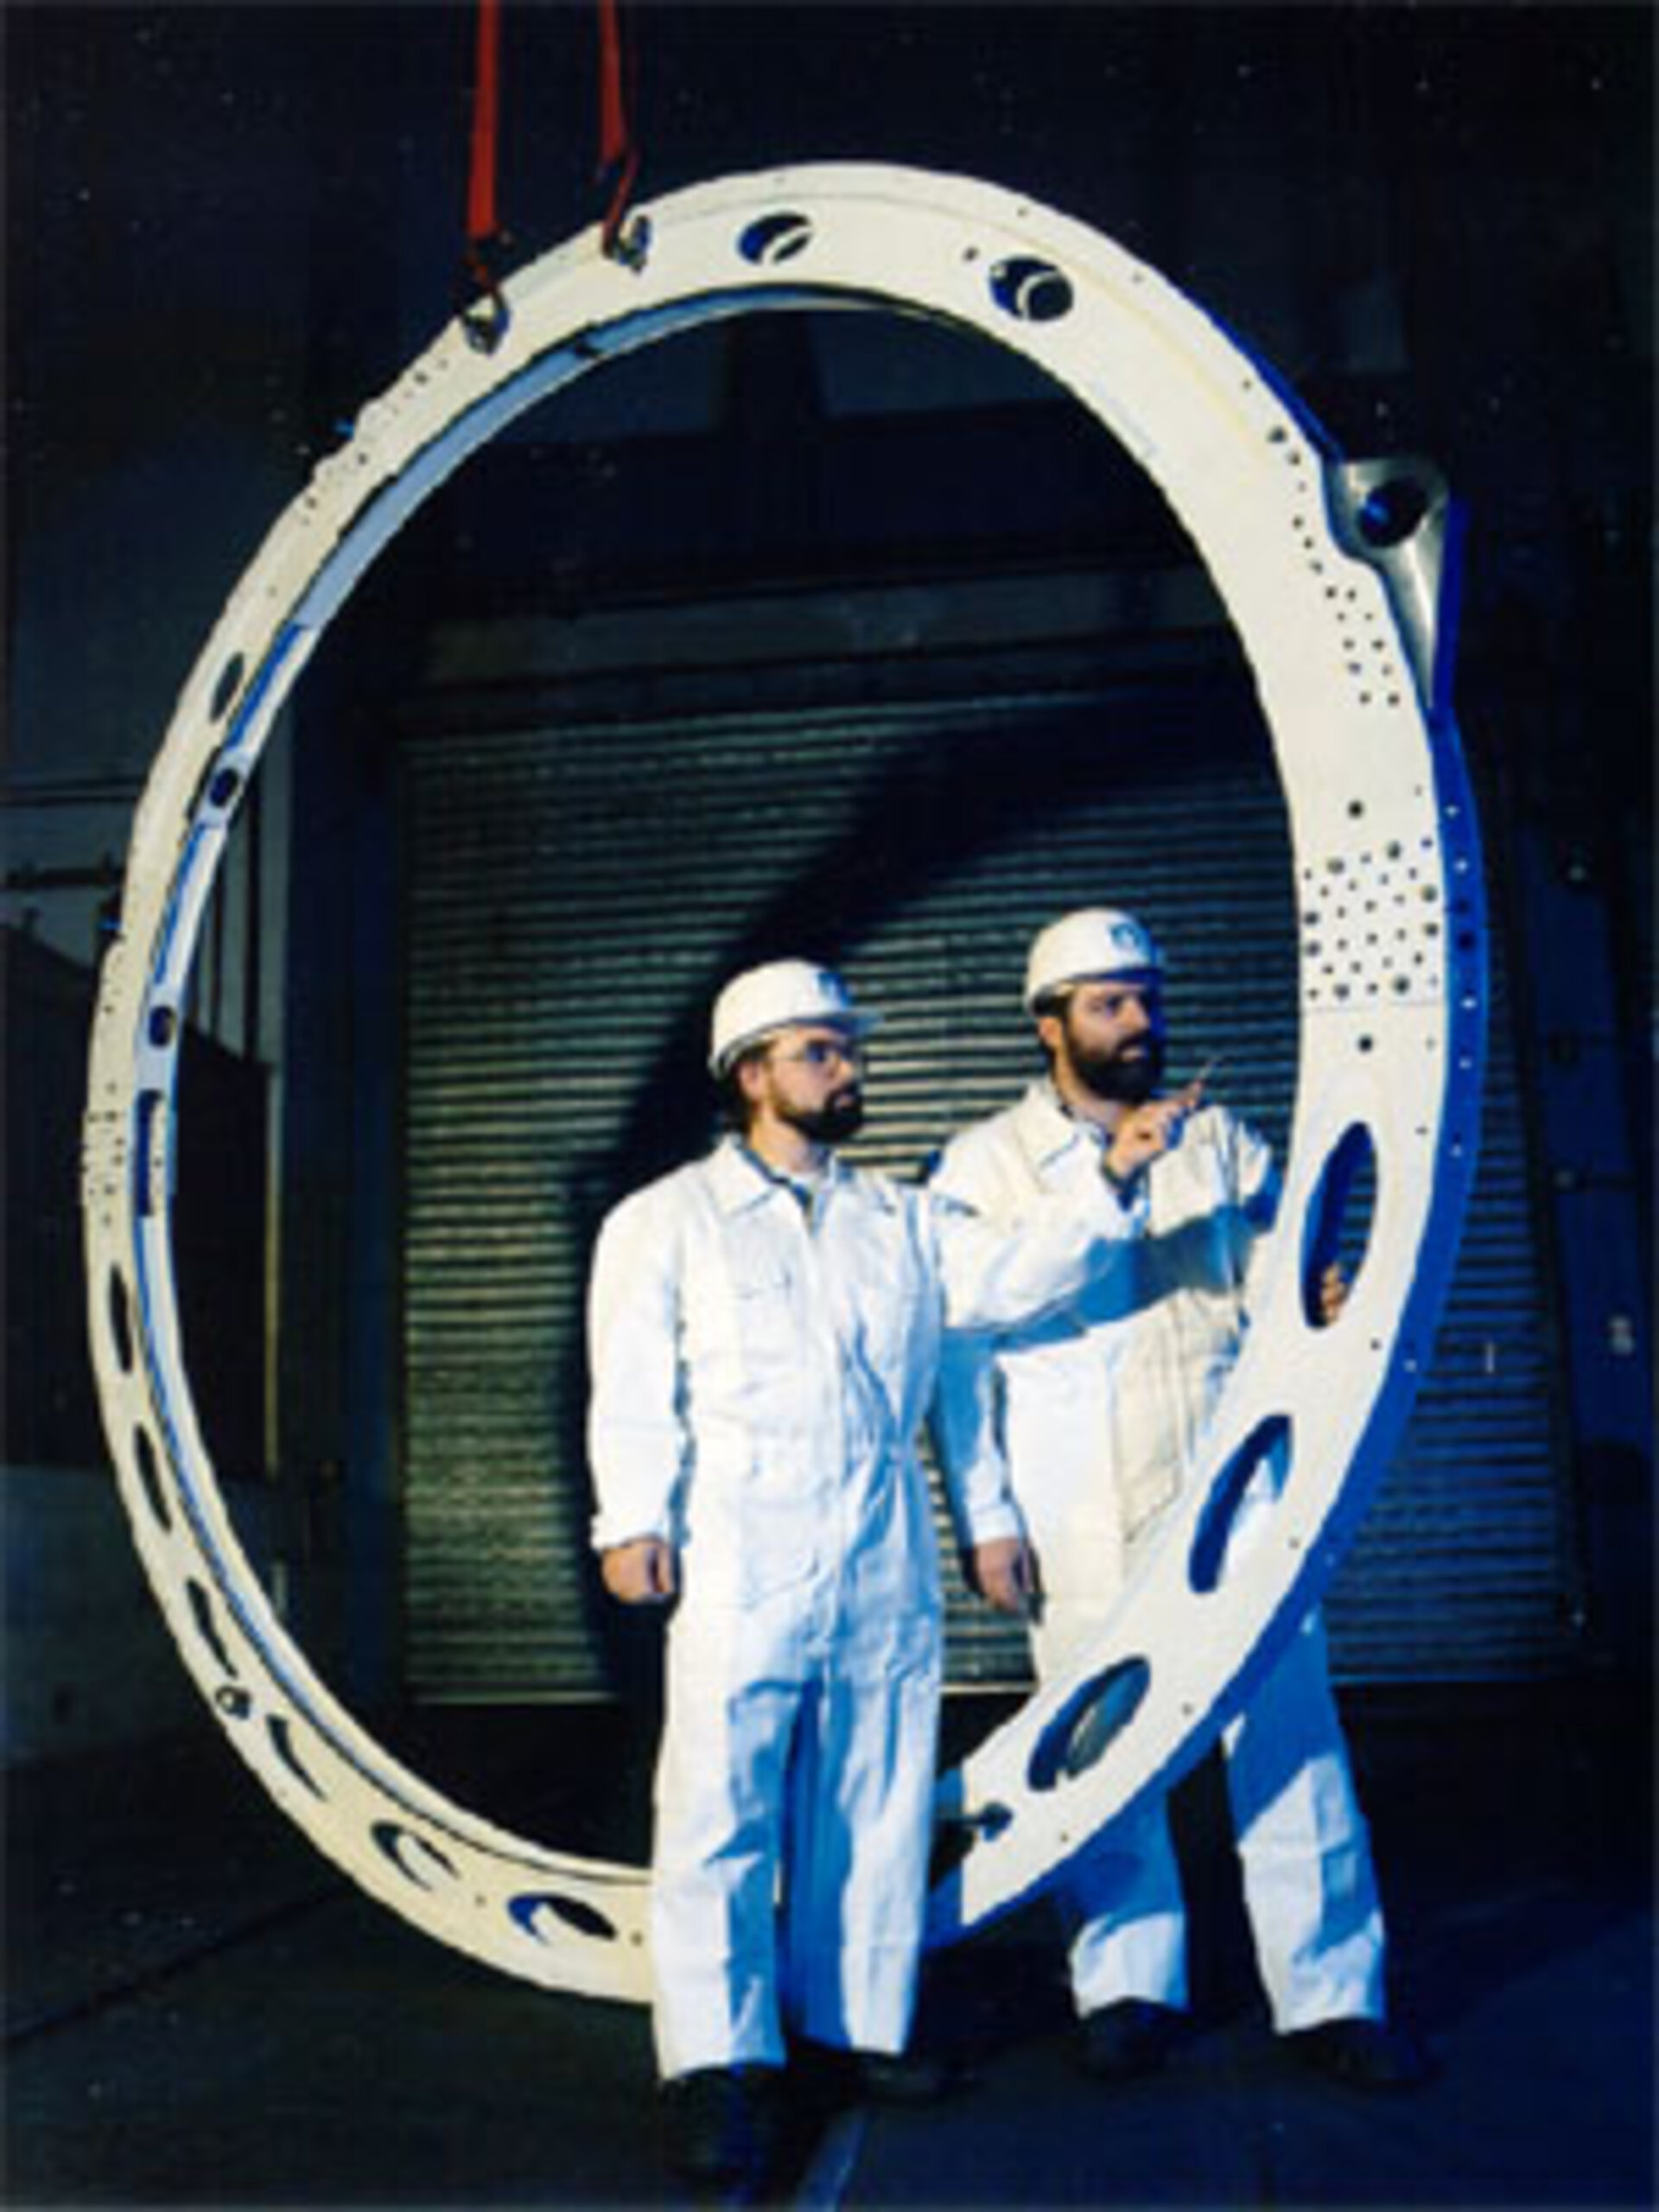 Retaining ring for Ariane-5 booster